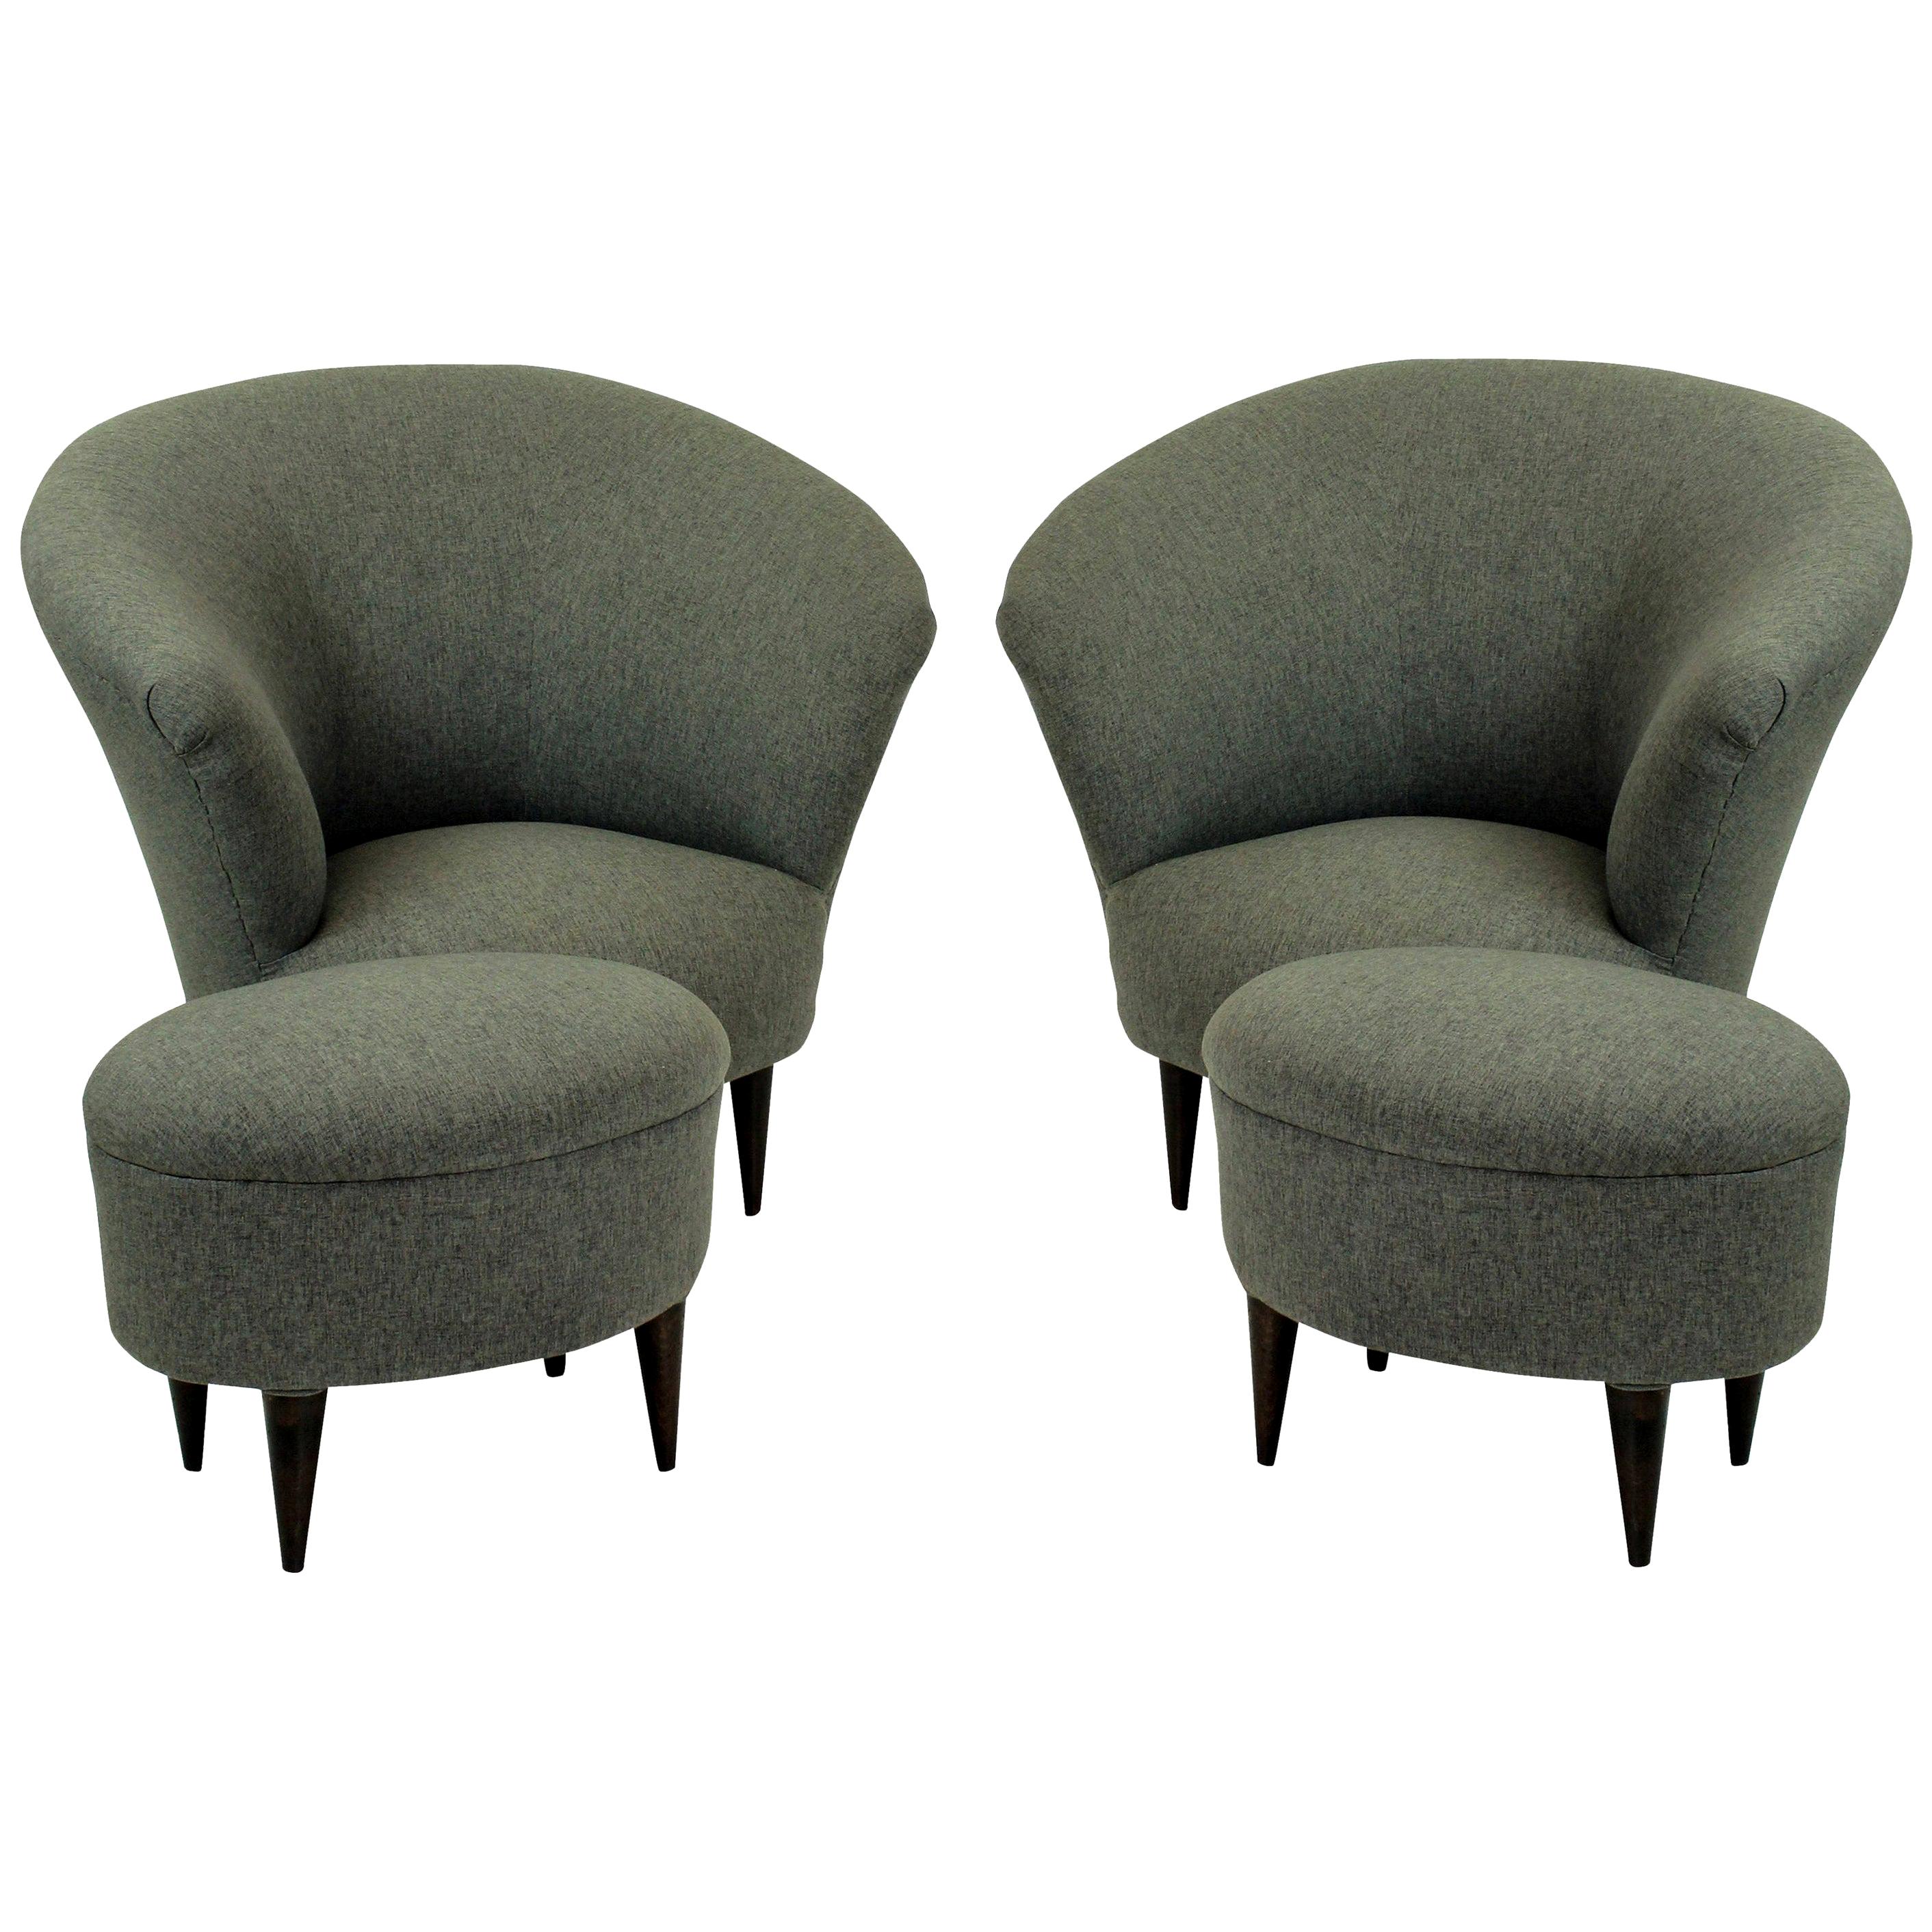 Pair of Sculptural Parisi Armchairs and Matching Foot Stools